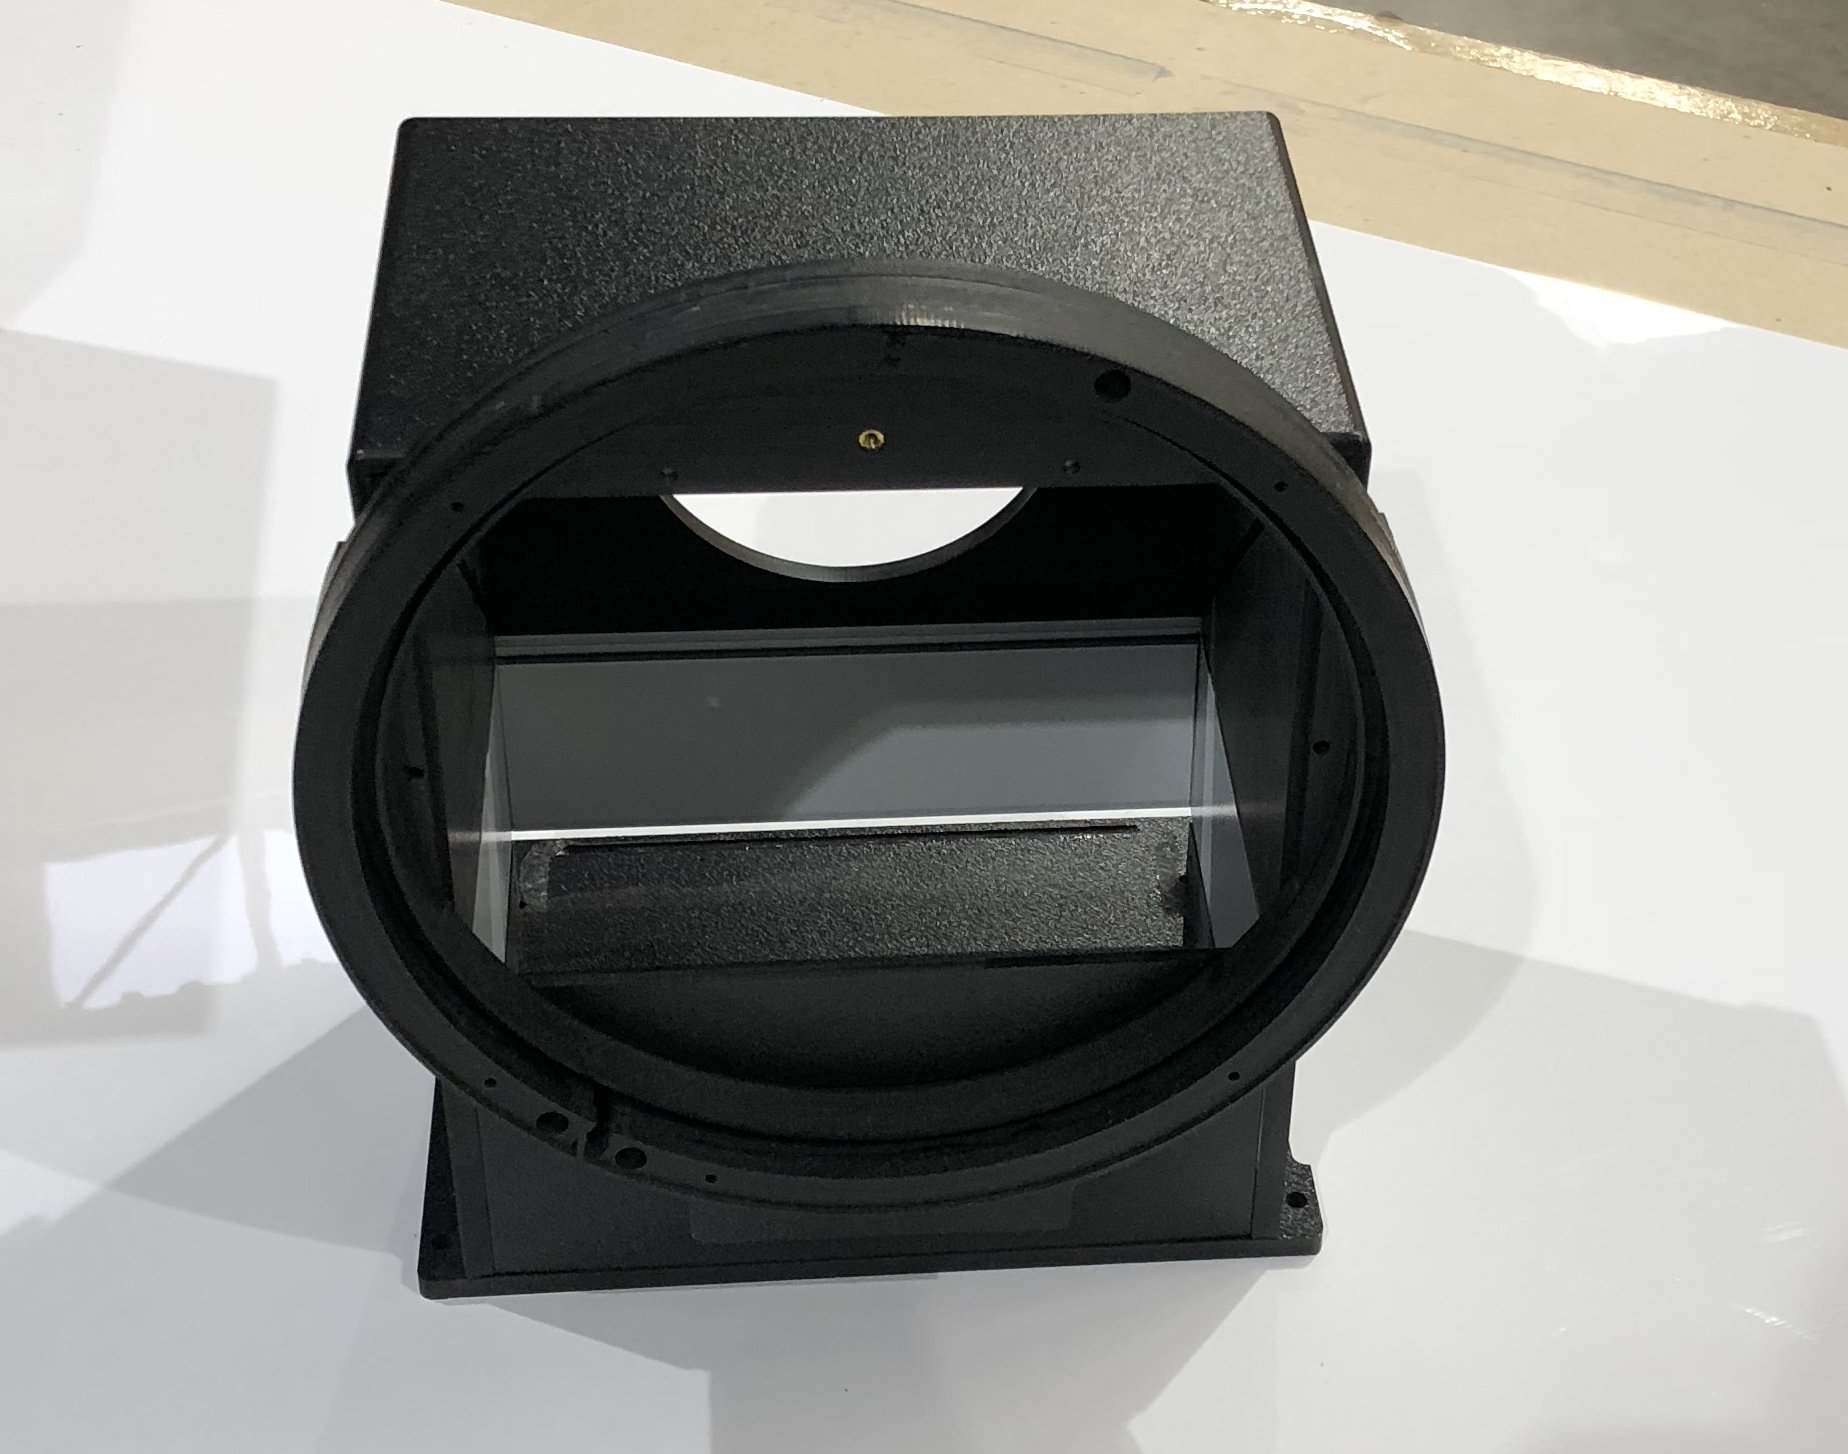 Black Camera case with large circular front and plastic insert